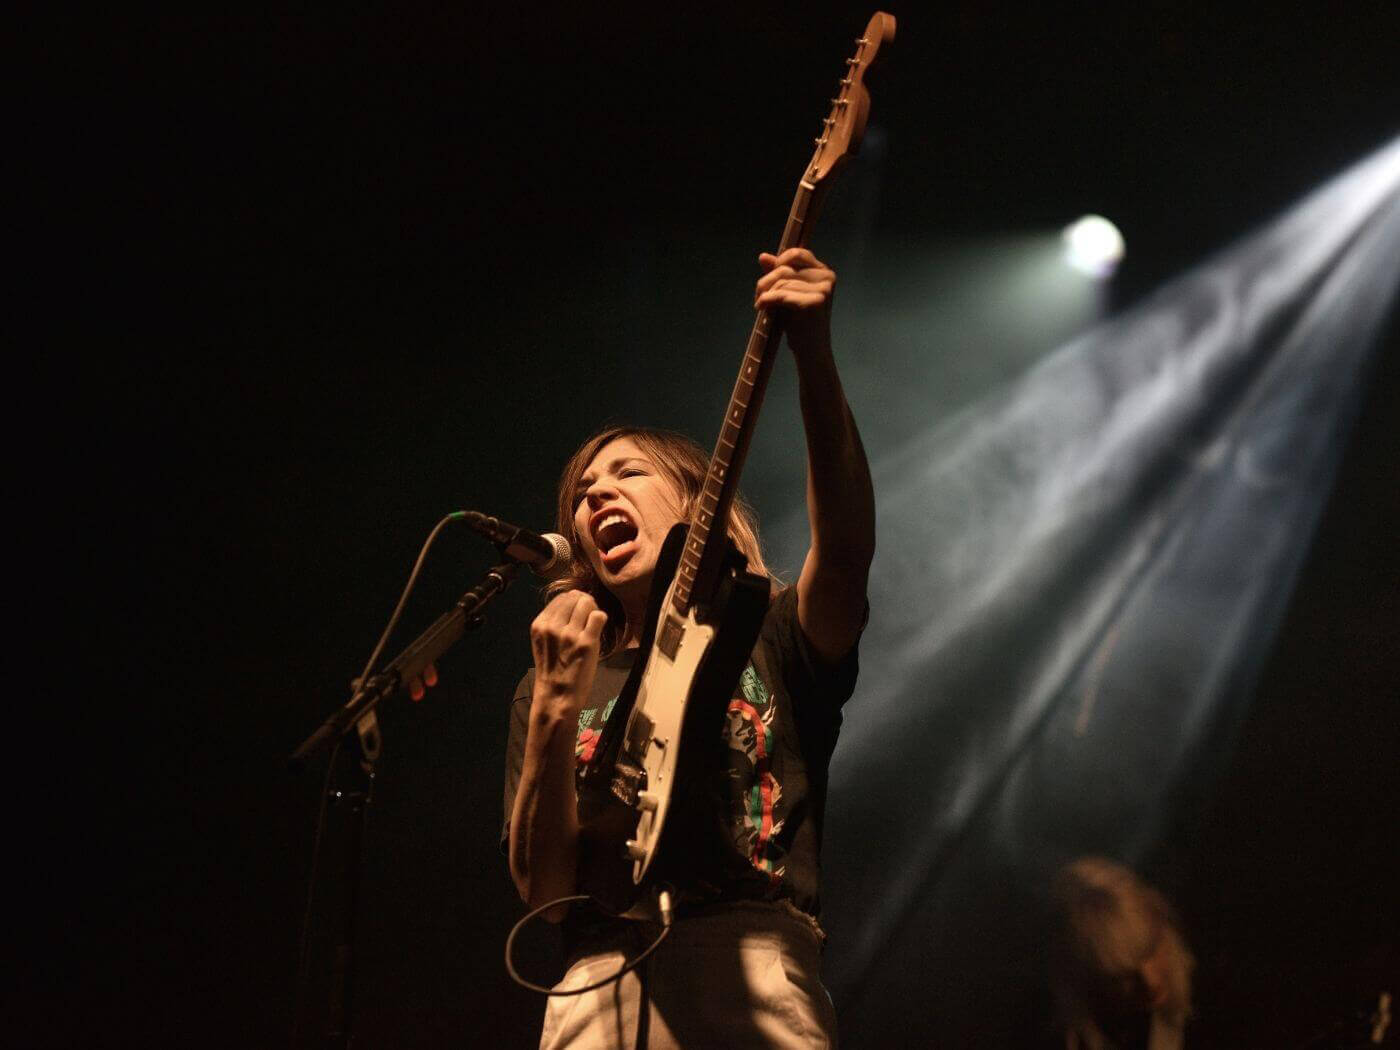 Carrie Brownstein of Sleater-Kinney performing live with a guitar, photo by Thomas Cooper/WireImage via Getty Images